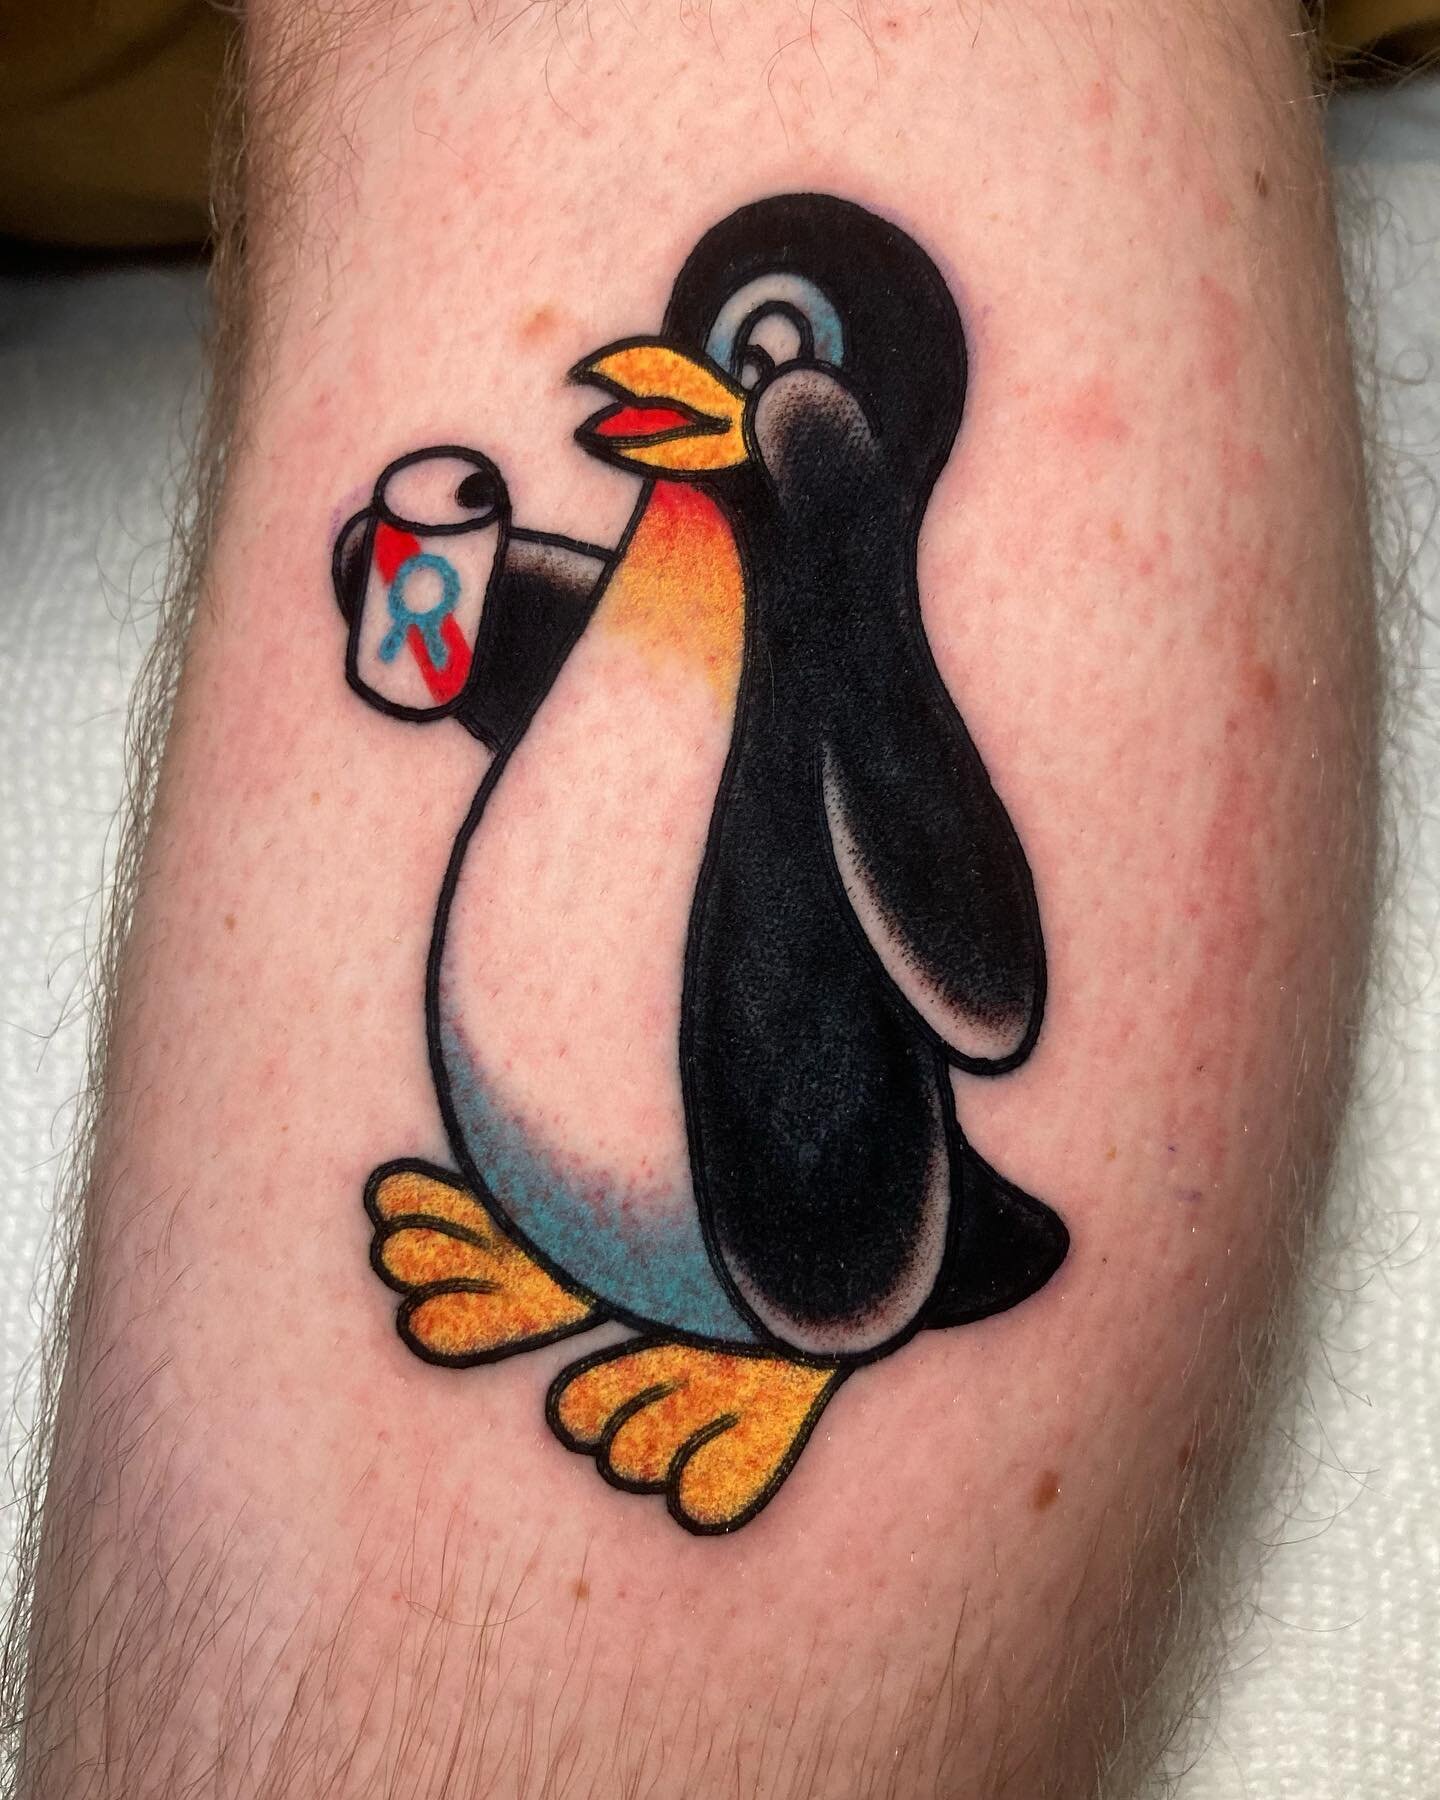 Emperor of beers @hotlinetattoo 

**************************************
To get on my waitlist, click the link in my Bio. If you're looking for something small, or a walk-in tattoo, feel free to call the shop at
508-827-7911 to see if I'm available!
